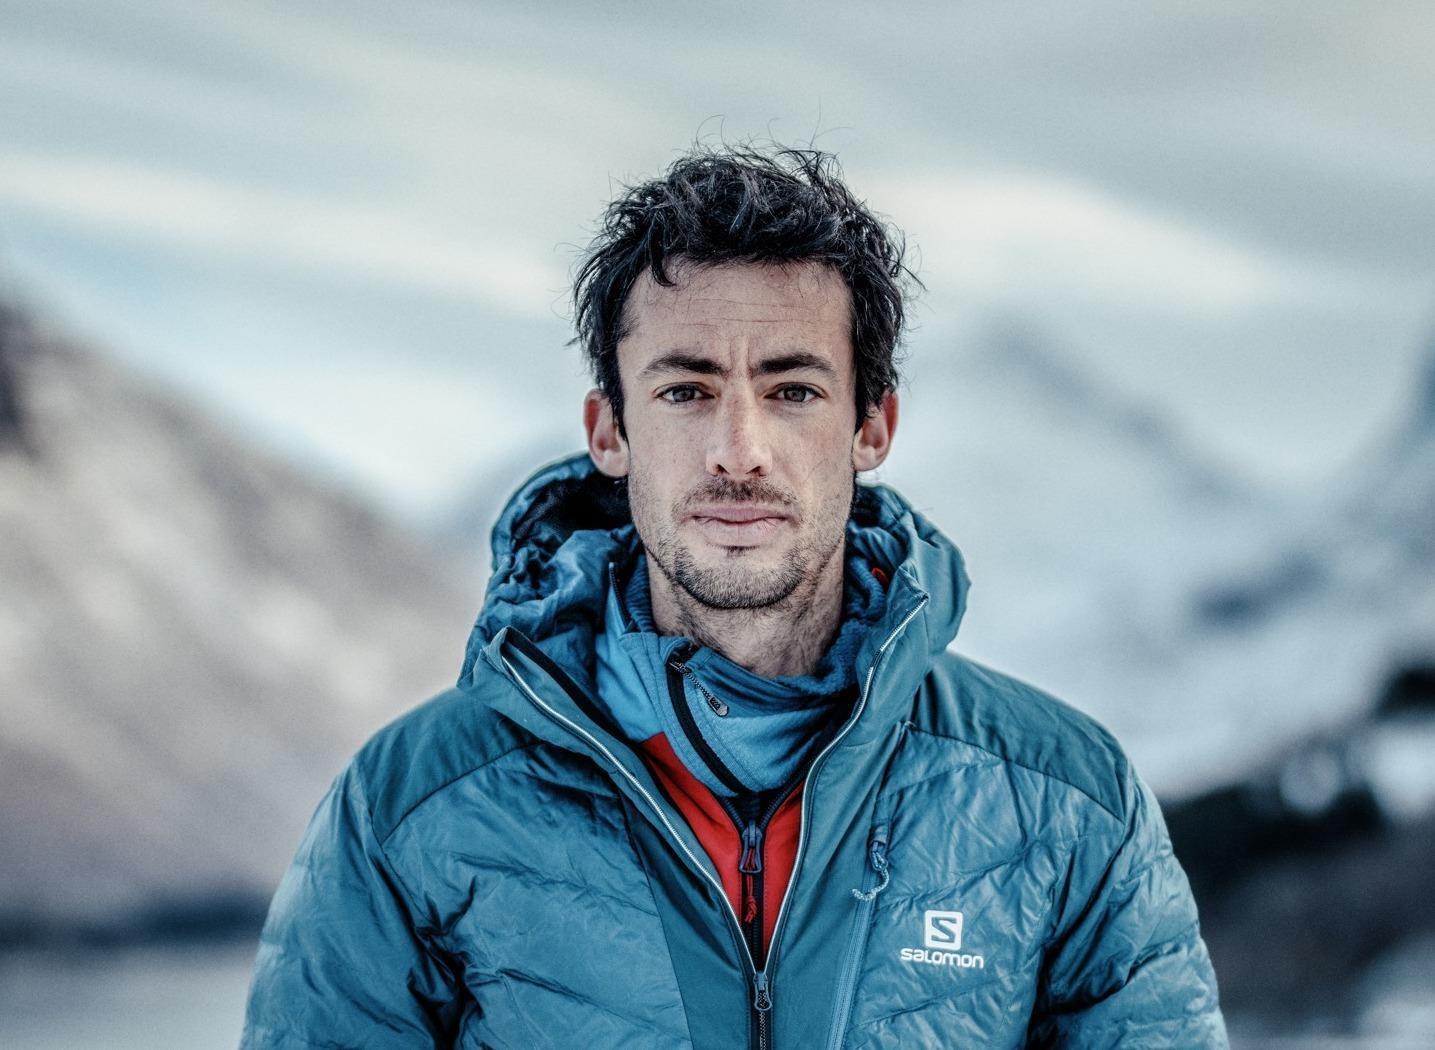 Kilian Jornet to leave for new project | Outdoor Industry Compass